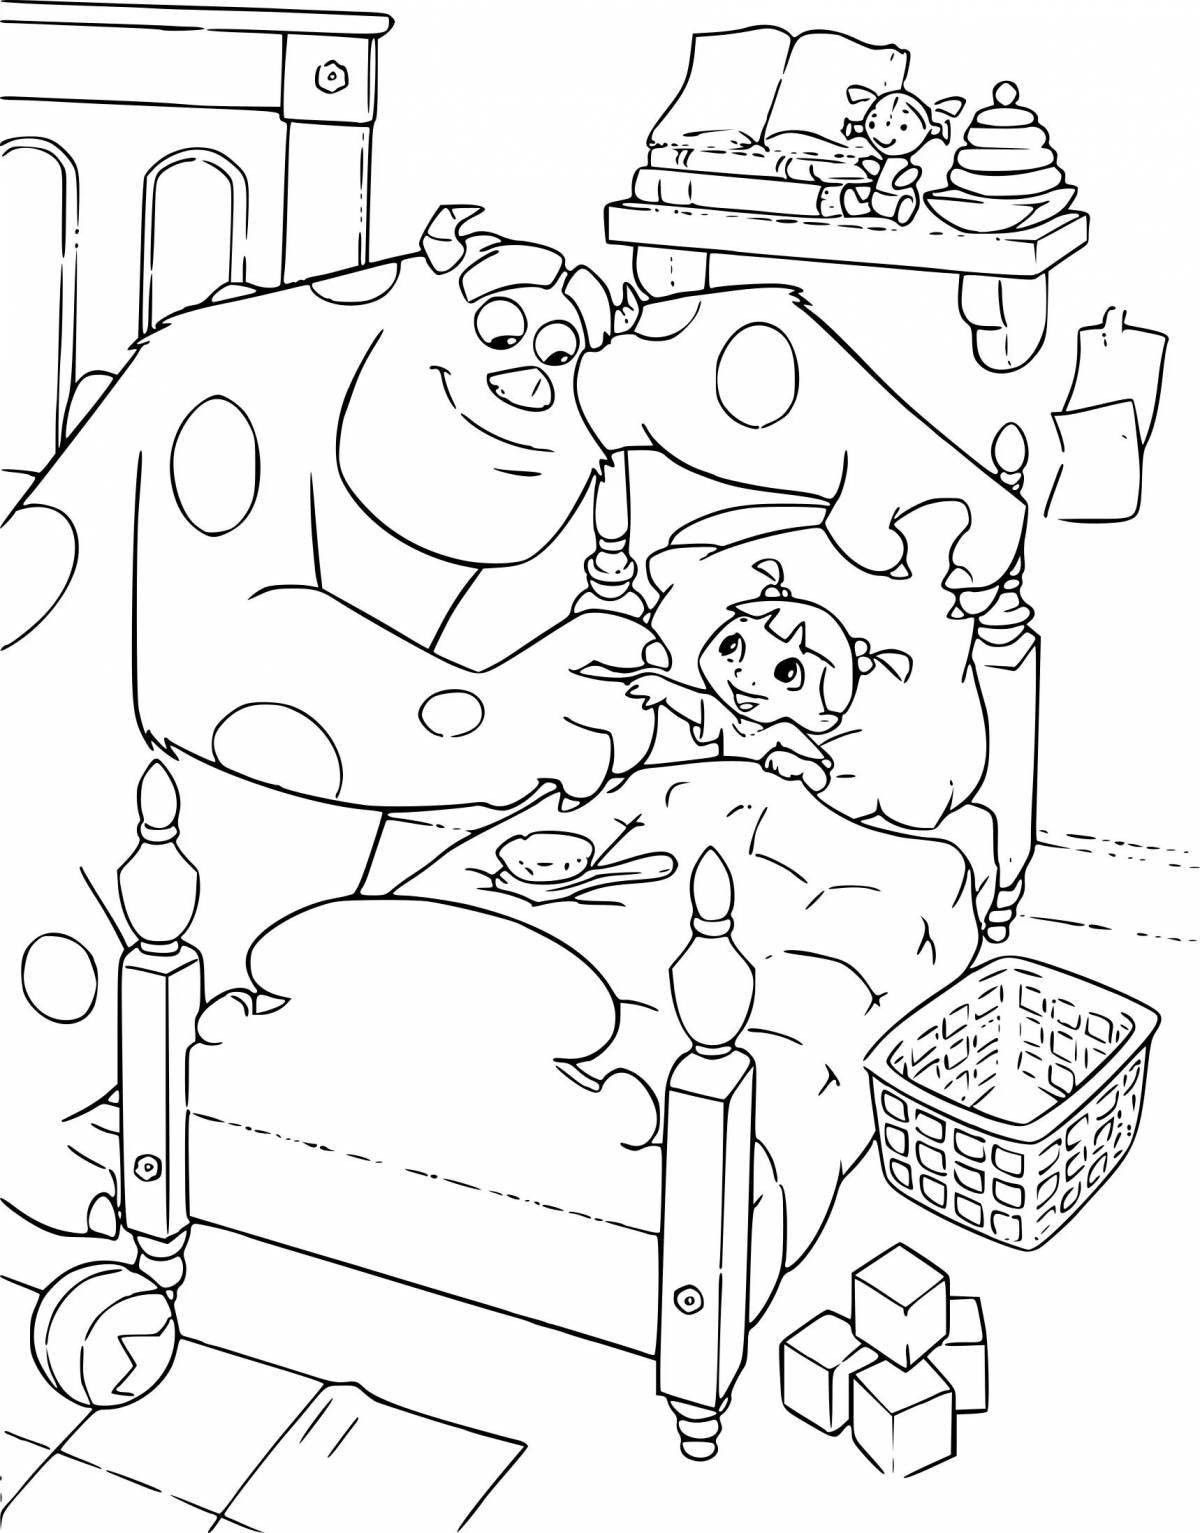 Sally and boo coloring pages